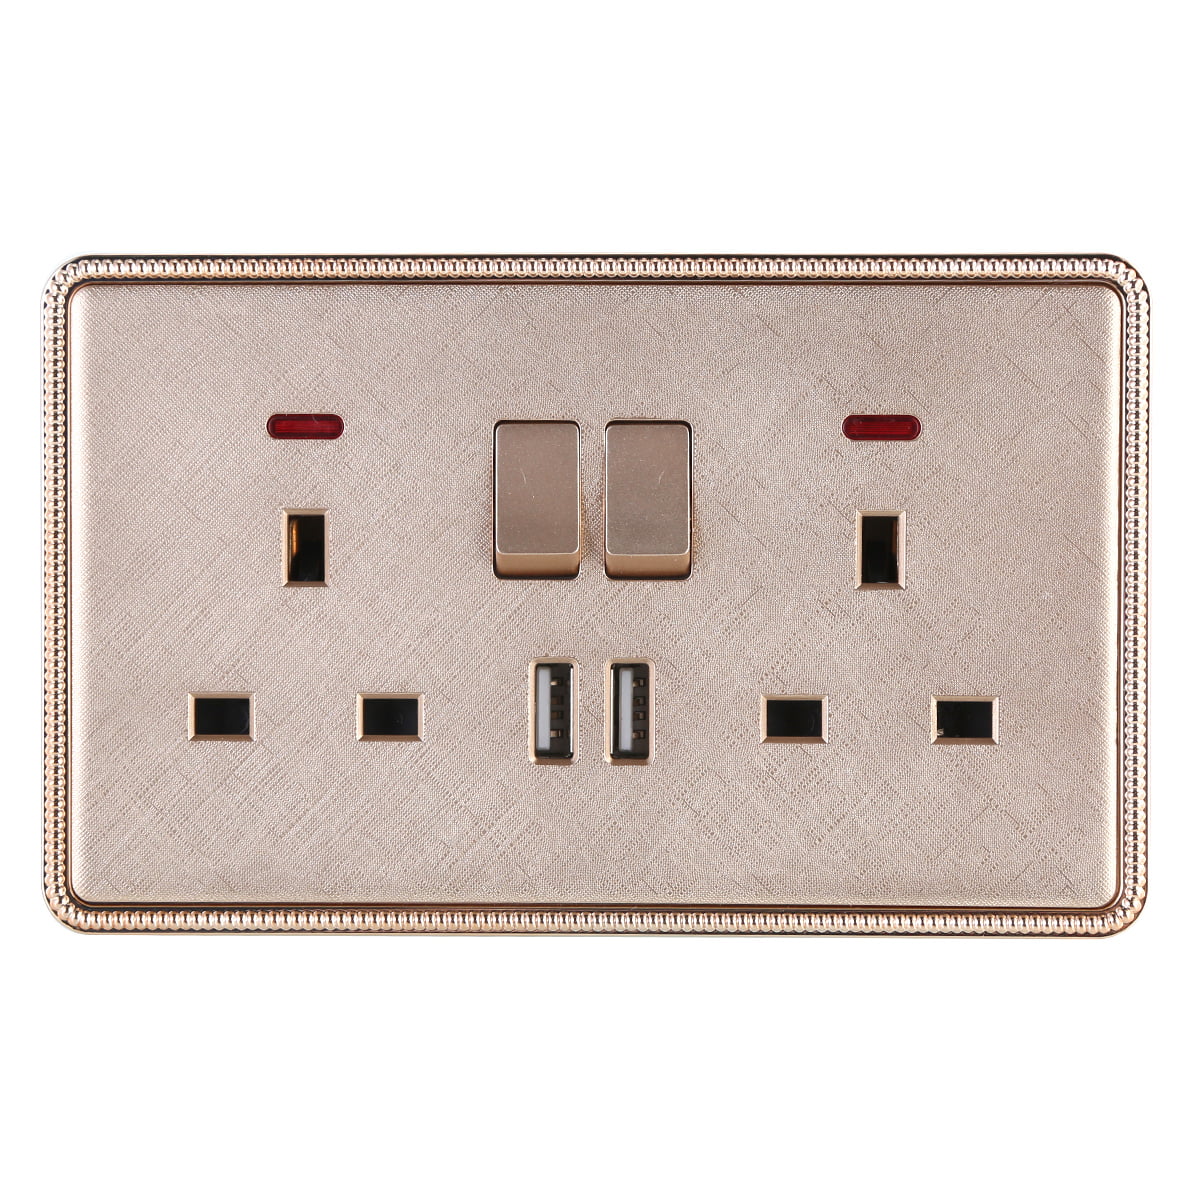 NEW 2 GANG 13AMP ROSE GOLD SOCKET DOUBLE SWITCH WALL HOME OFFICE POWER ELECTRIC 